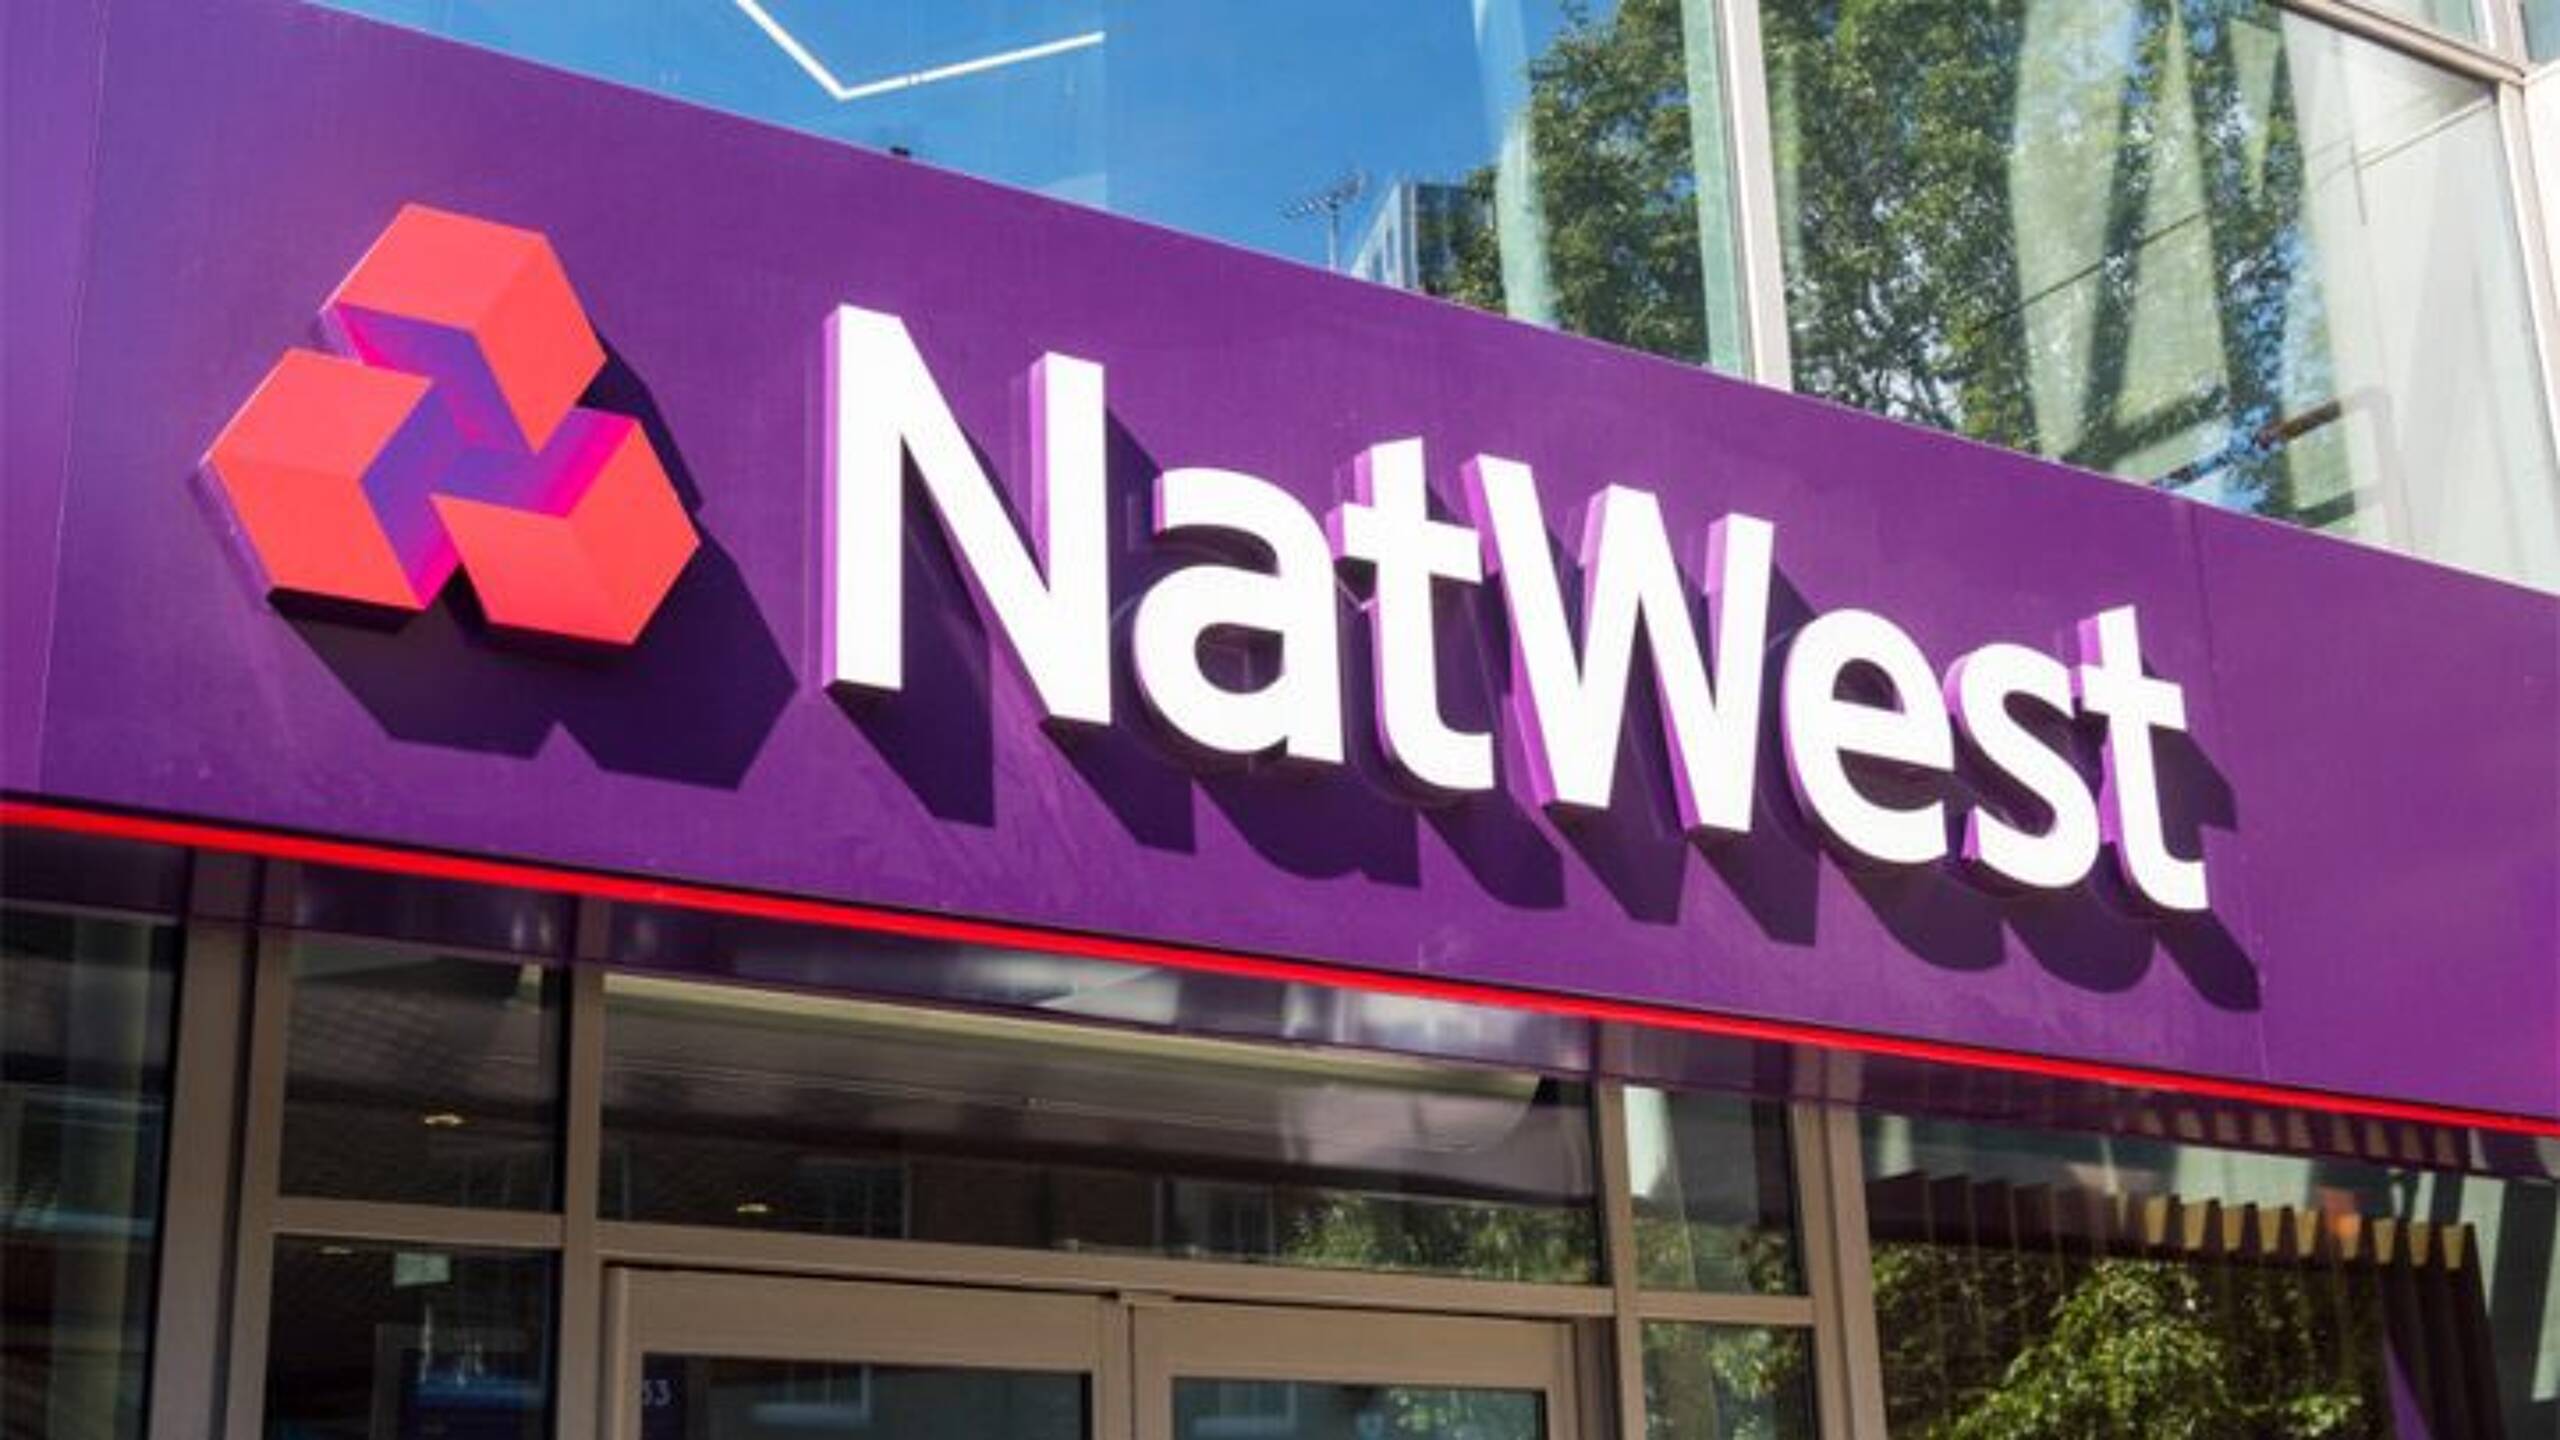 NatWest joins UN-backed Bankers for Net-Zero initiative